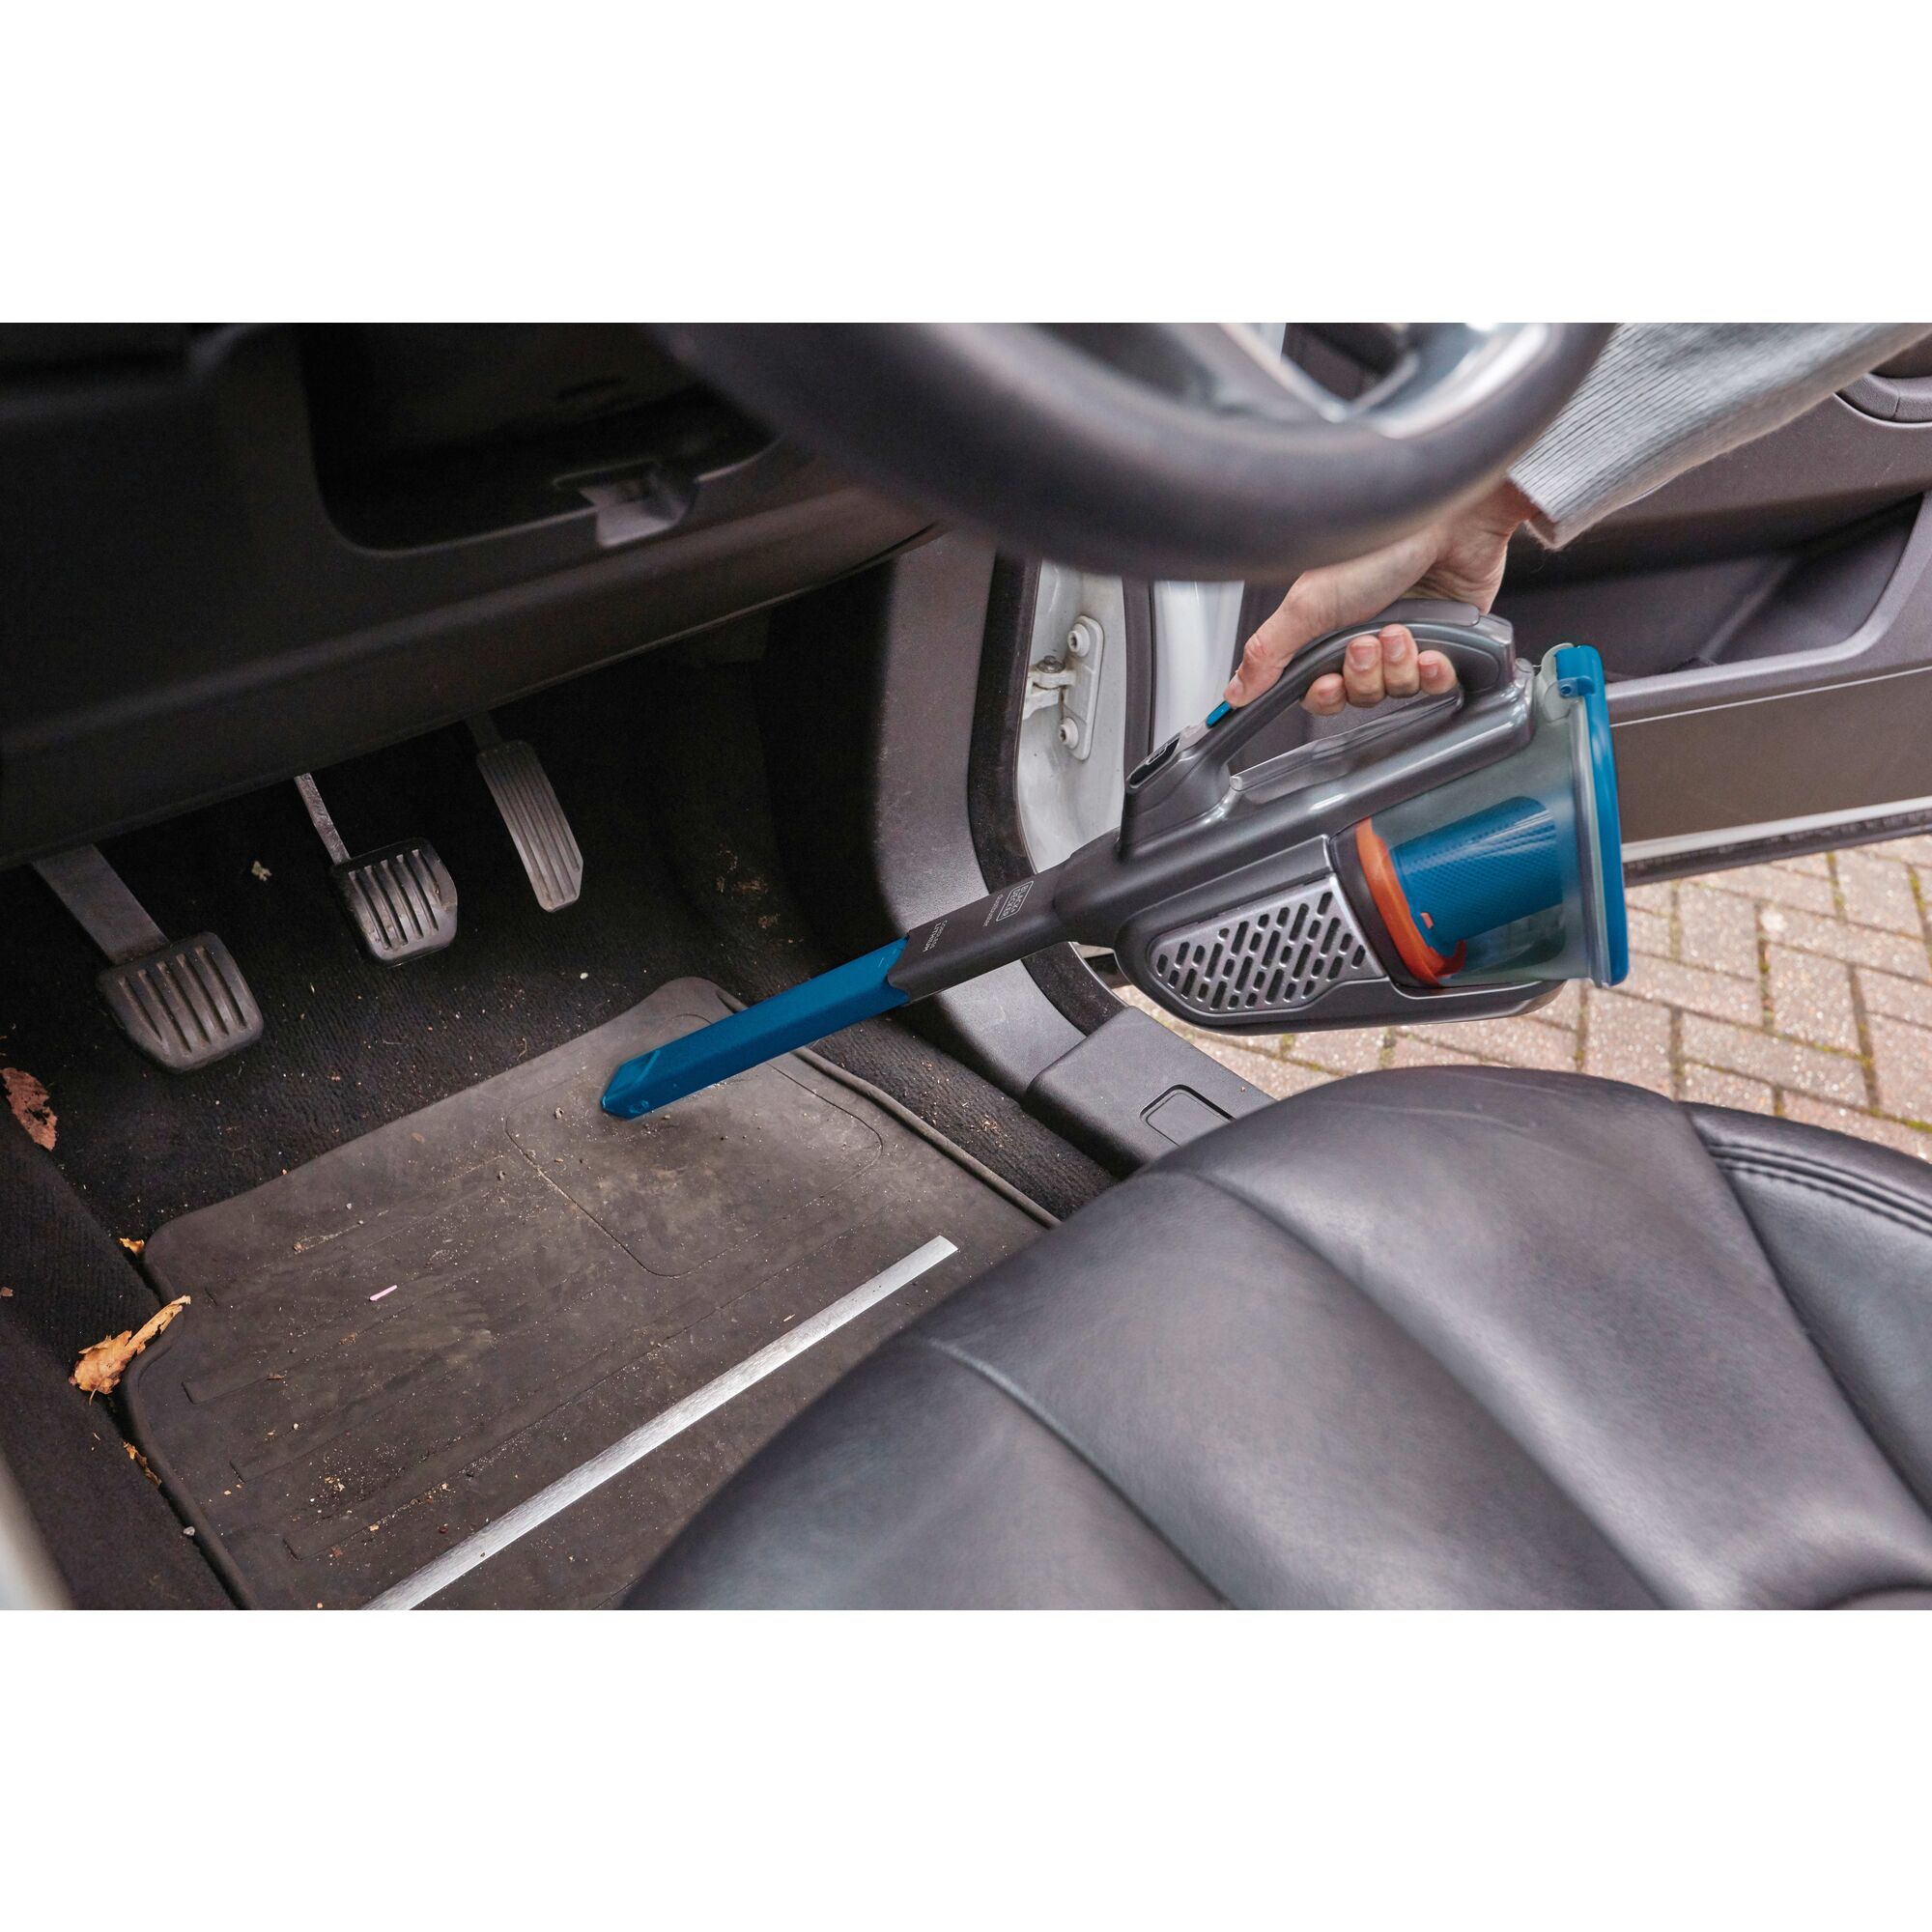 dust buster Advanced Clean plus Cordless Hand Vacuum being used to clean car floor.